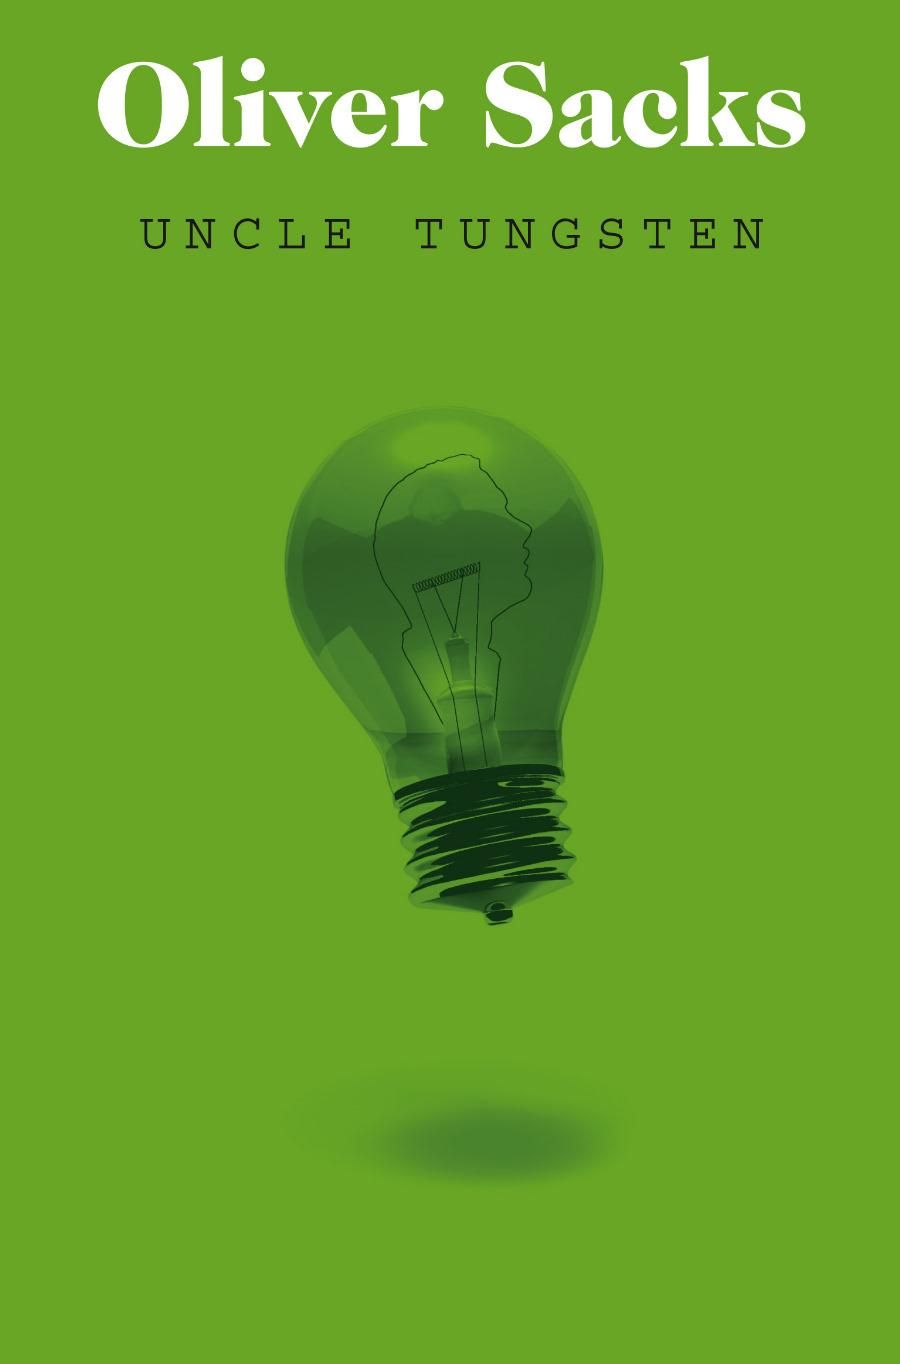 Uncle Tungsten: Memories of a Chemical Boyhood